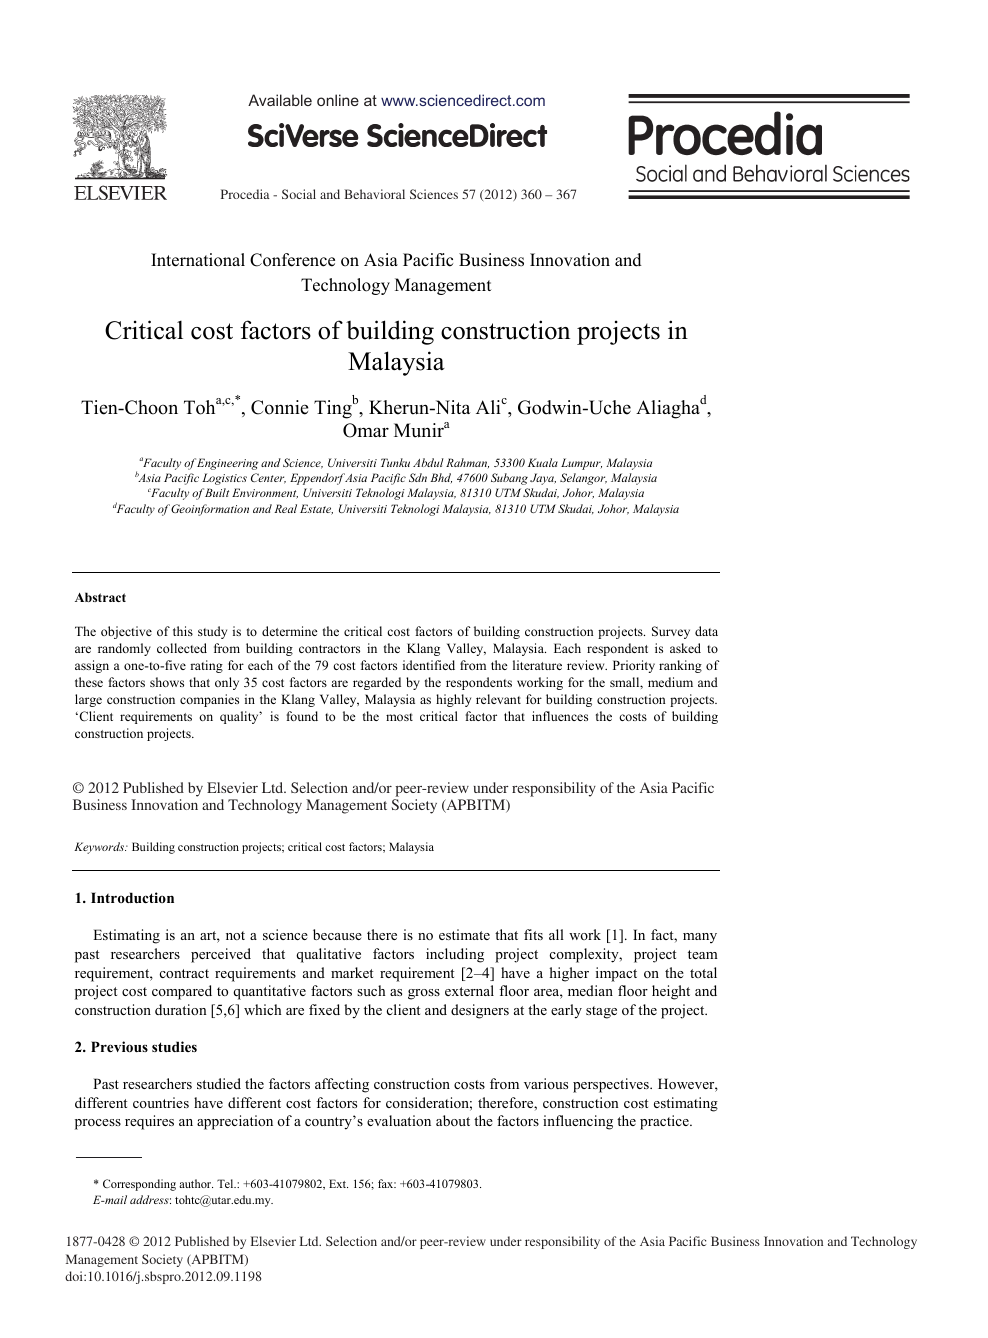 Critical Cost Factors Of Building Construction Projects In Malaysia Topic Of Research Paper In Civil Engineering Download Scholarly Article Pdf And Read For Free On Cyberleninka Open Science Hub